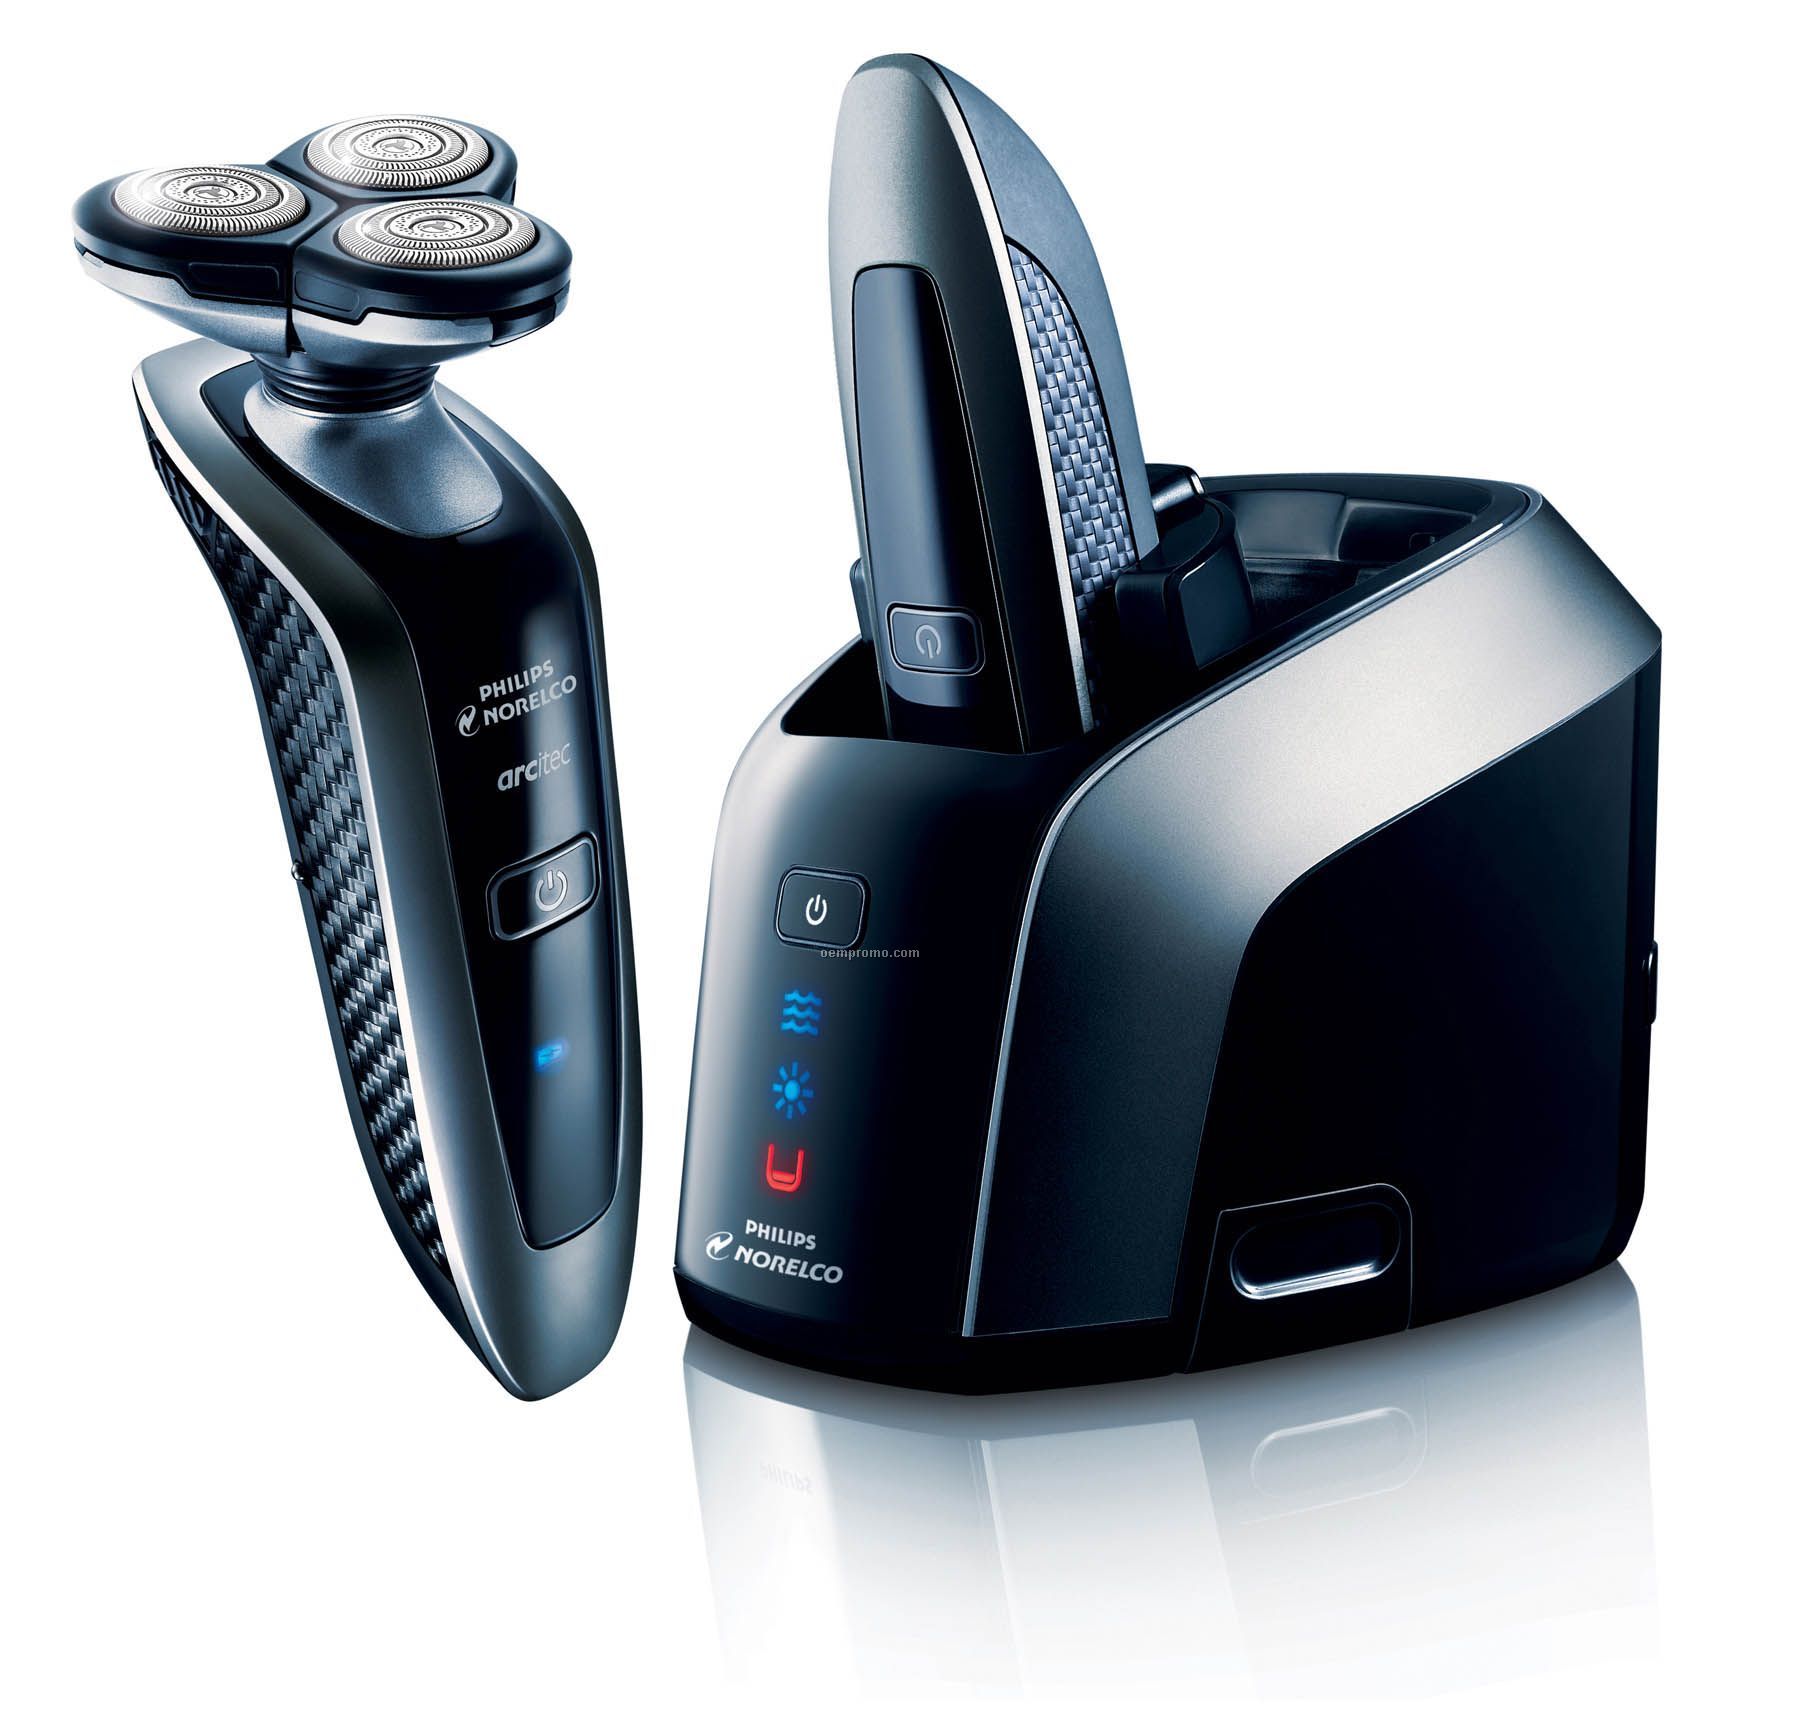 Philips Norelco Cordless Arcitec Jet Clean Shaving System